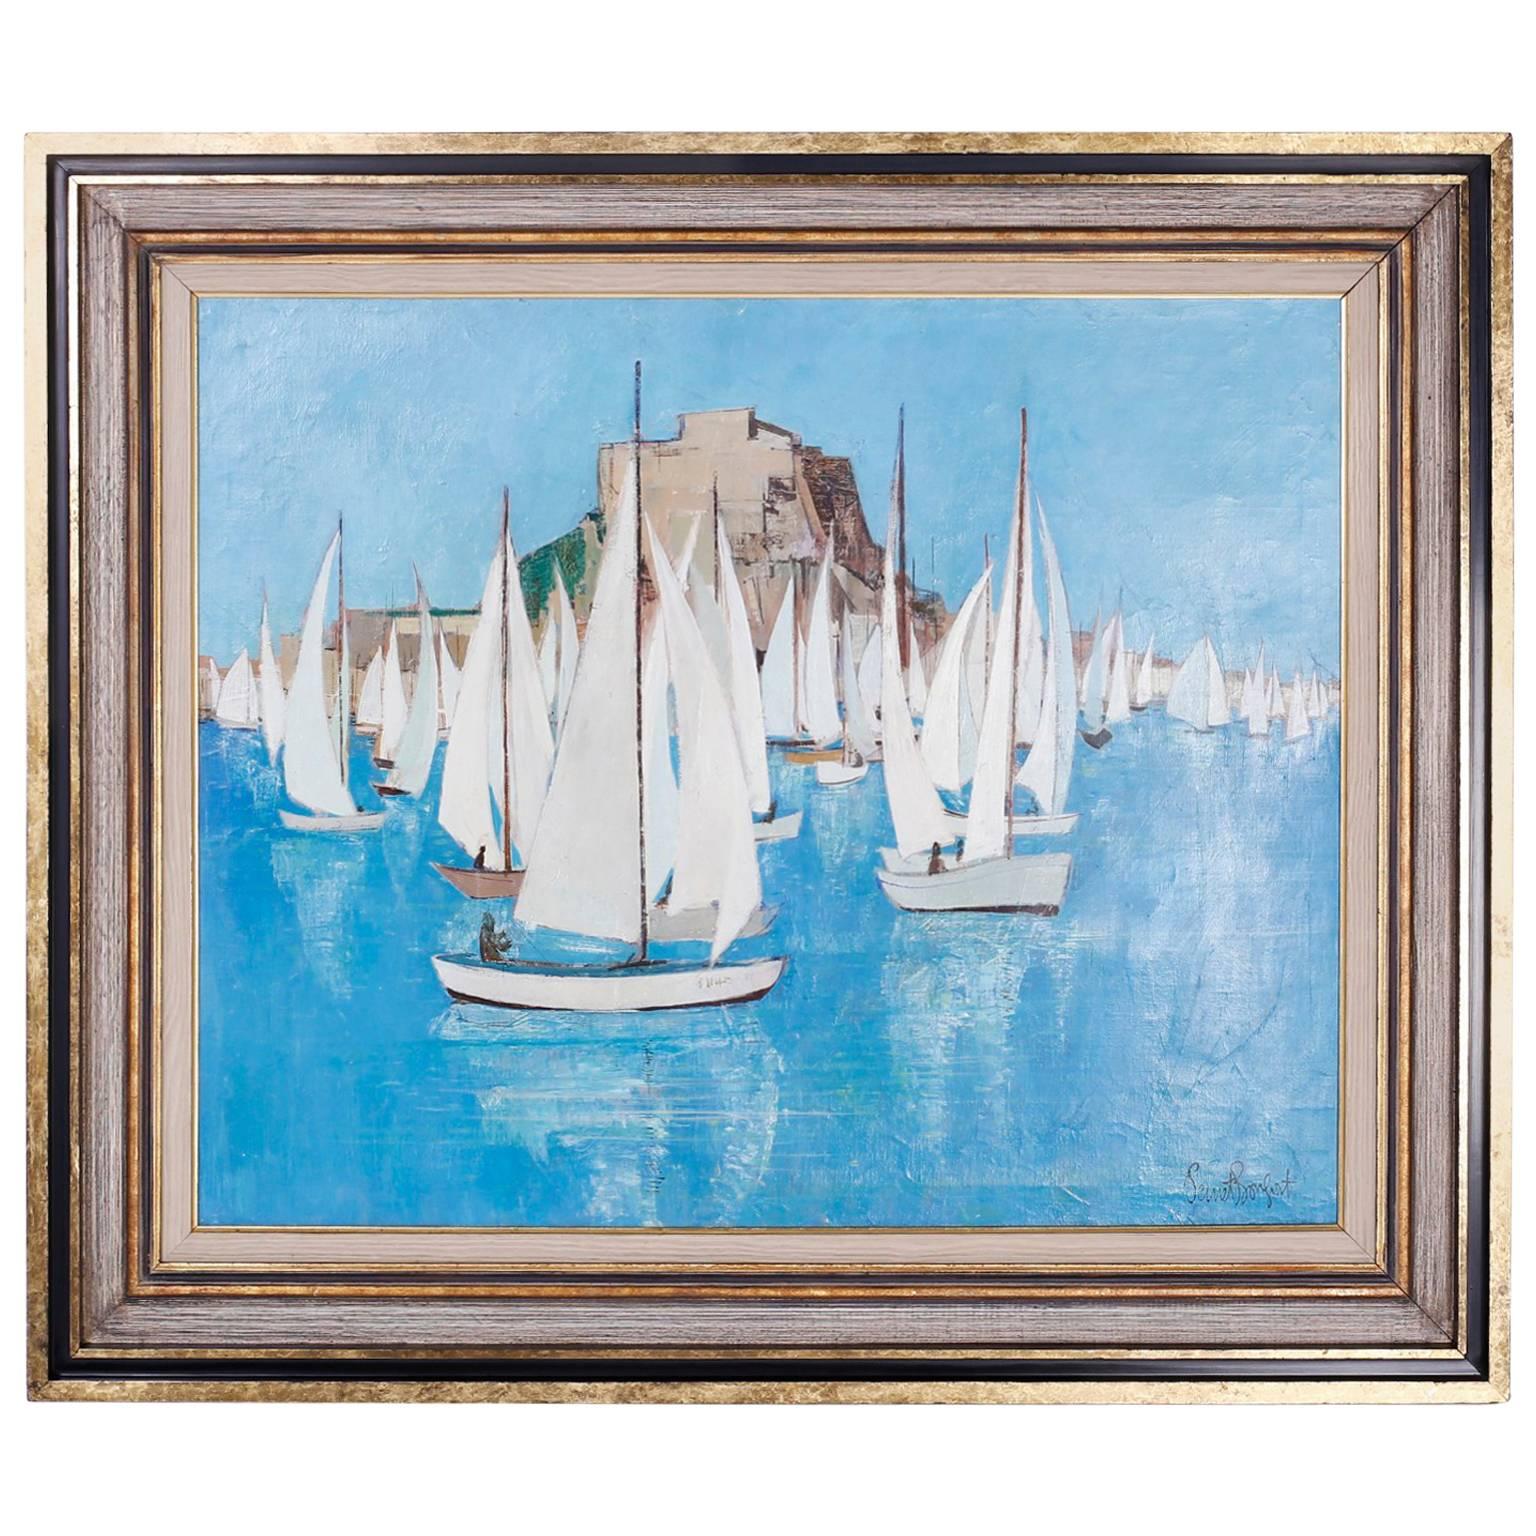 Mid-Century Modern Oil Painting on Canvas Depicting a Sailboat Race